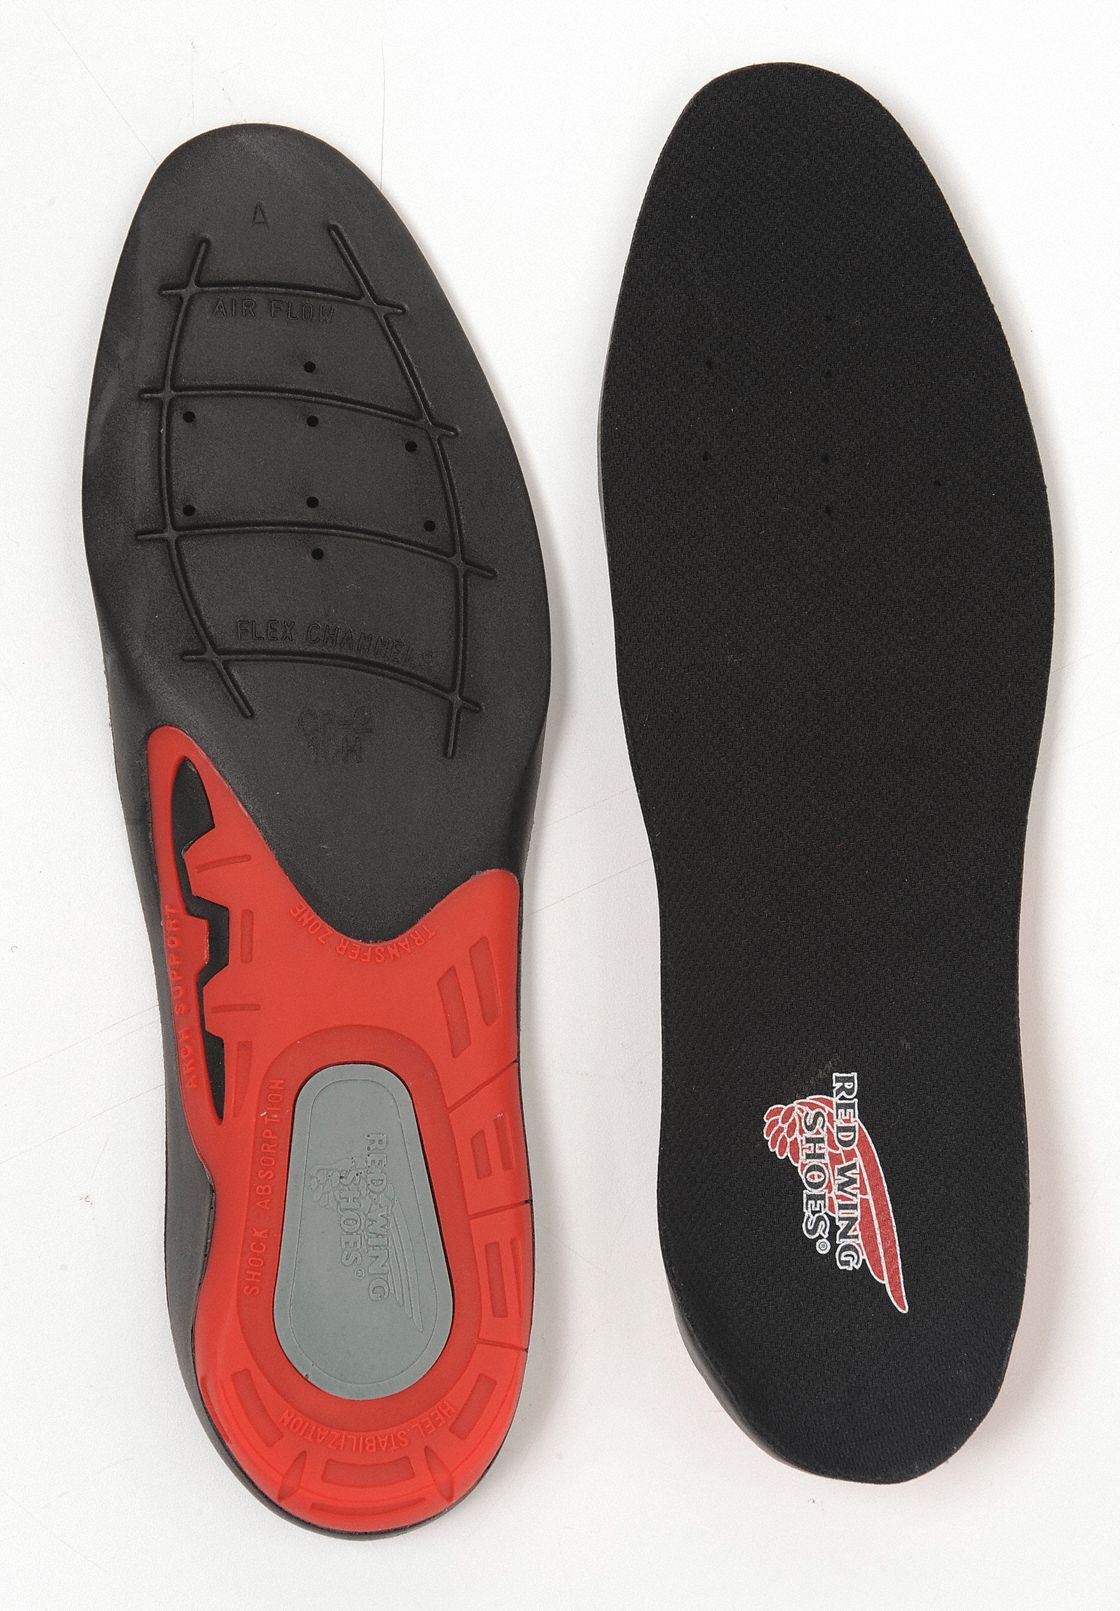 RED WING SHOES Replacement Insole,Men's,14,PR - 8MZC5|96388 14 - Grainger